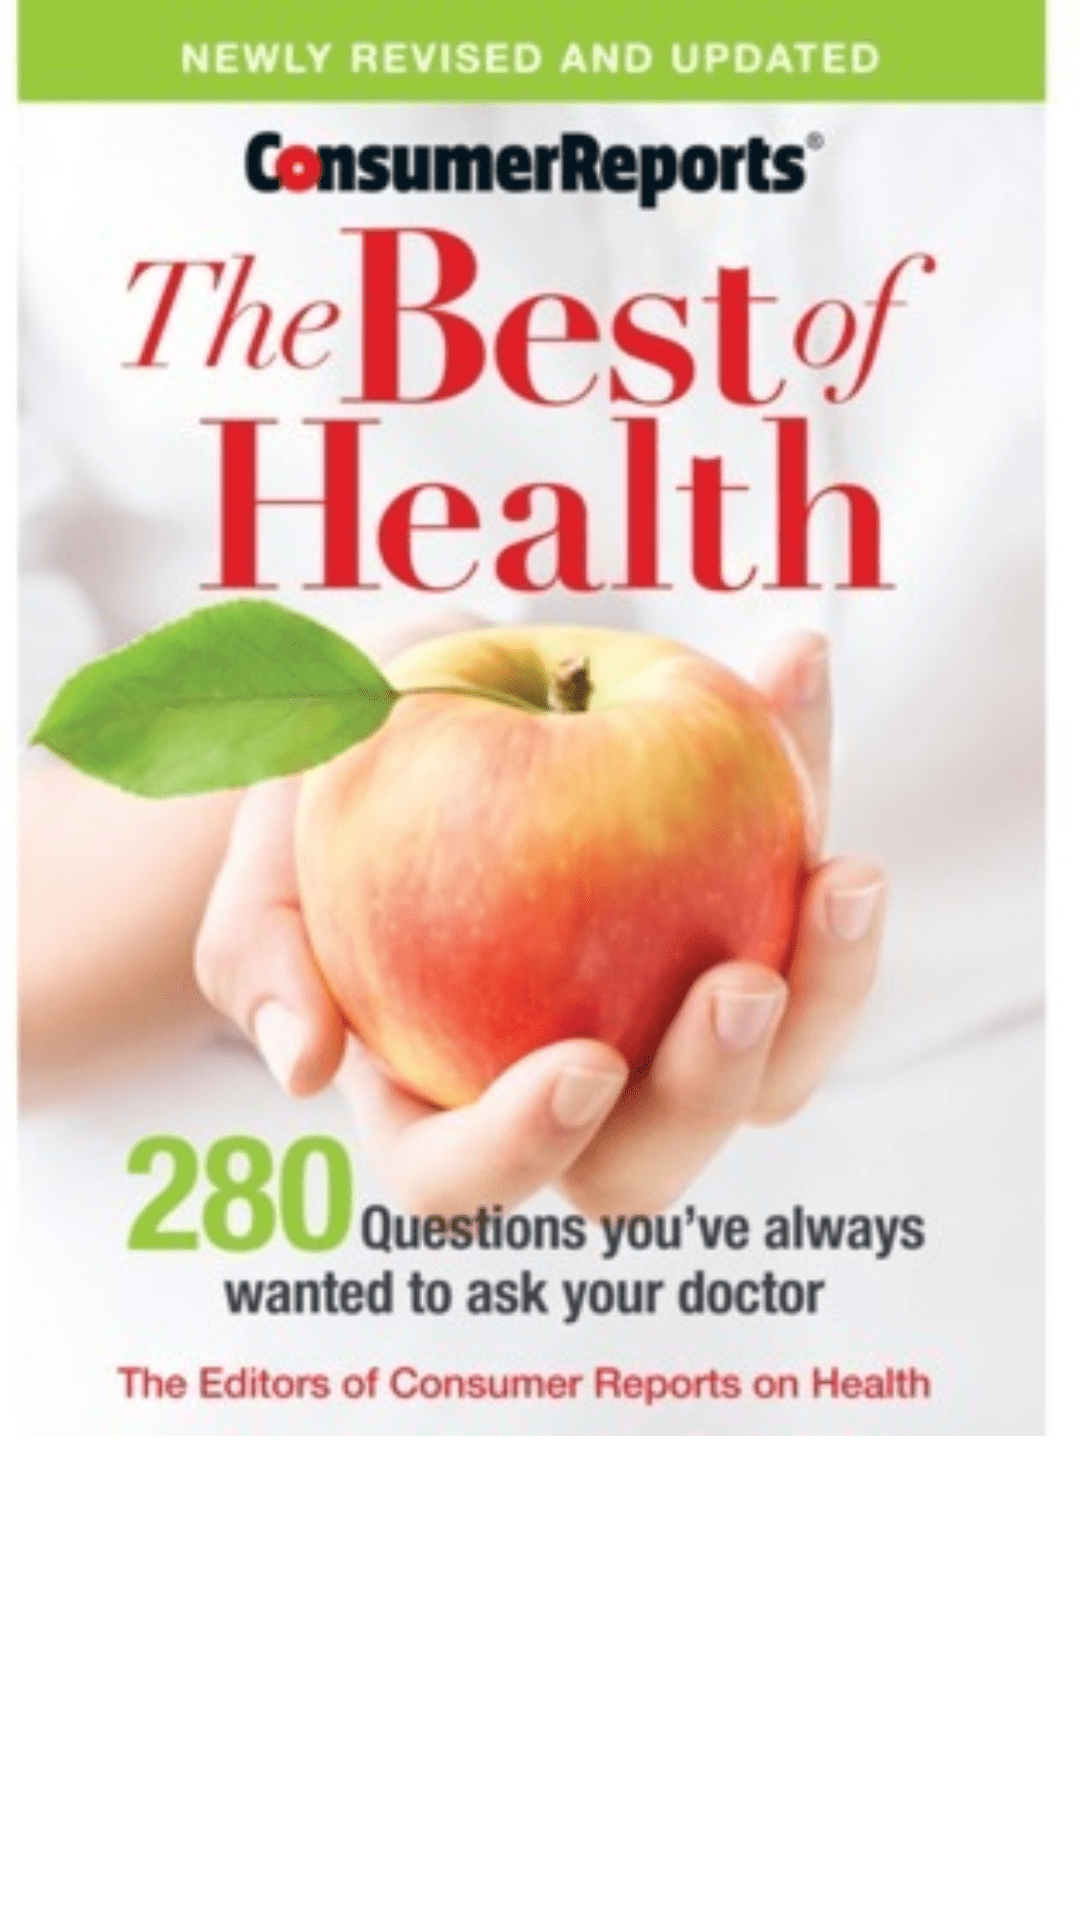 The Best of Health by Marvin M. Lipman